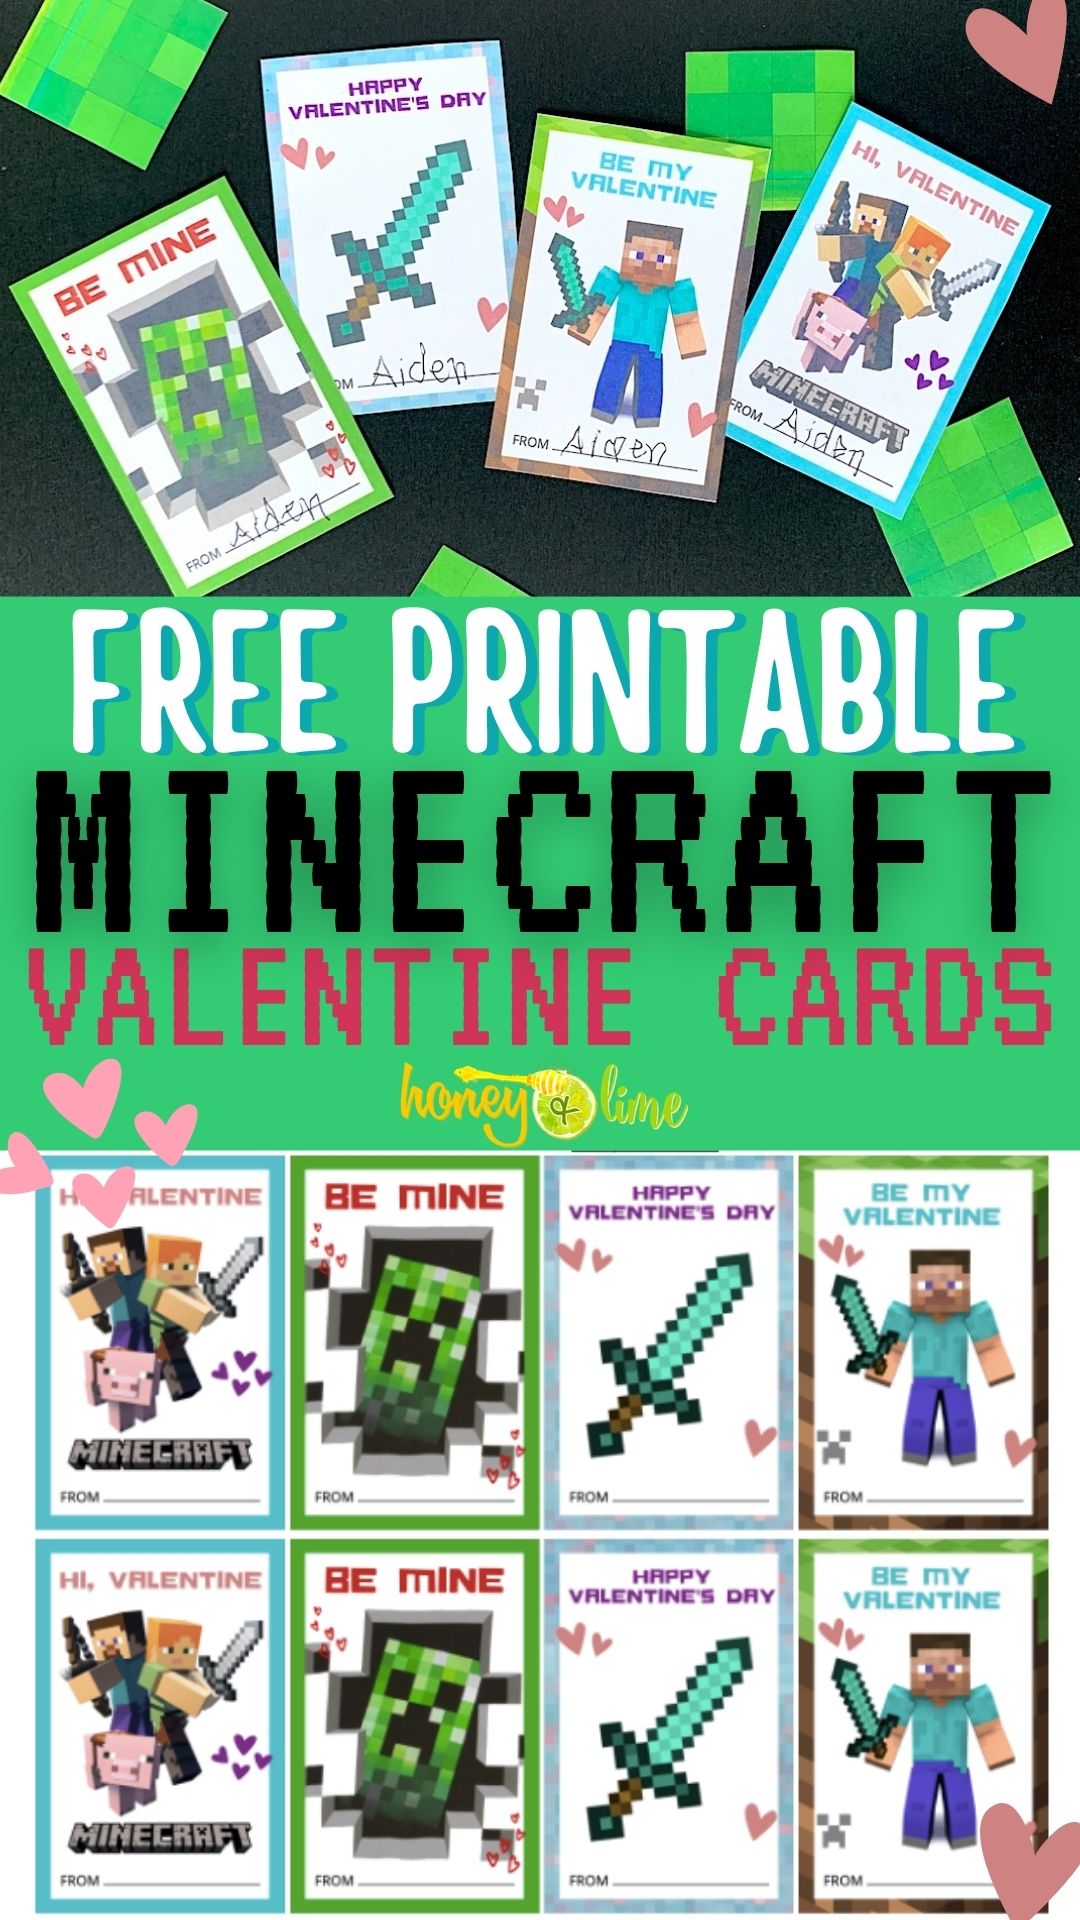 Free Printable Minecraft Valentines Day Cards For Kids - they will love these fun Minecraft Valentine ideas